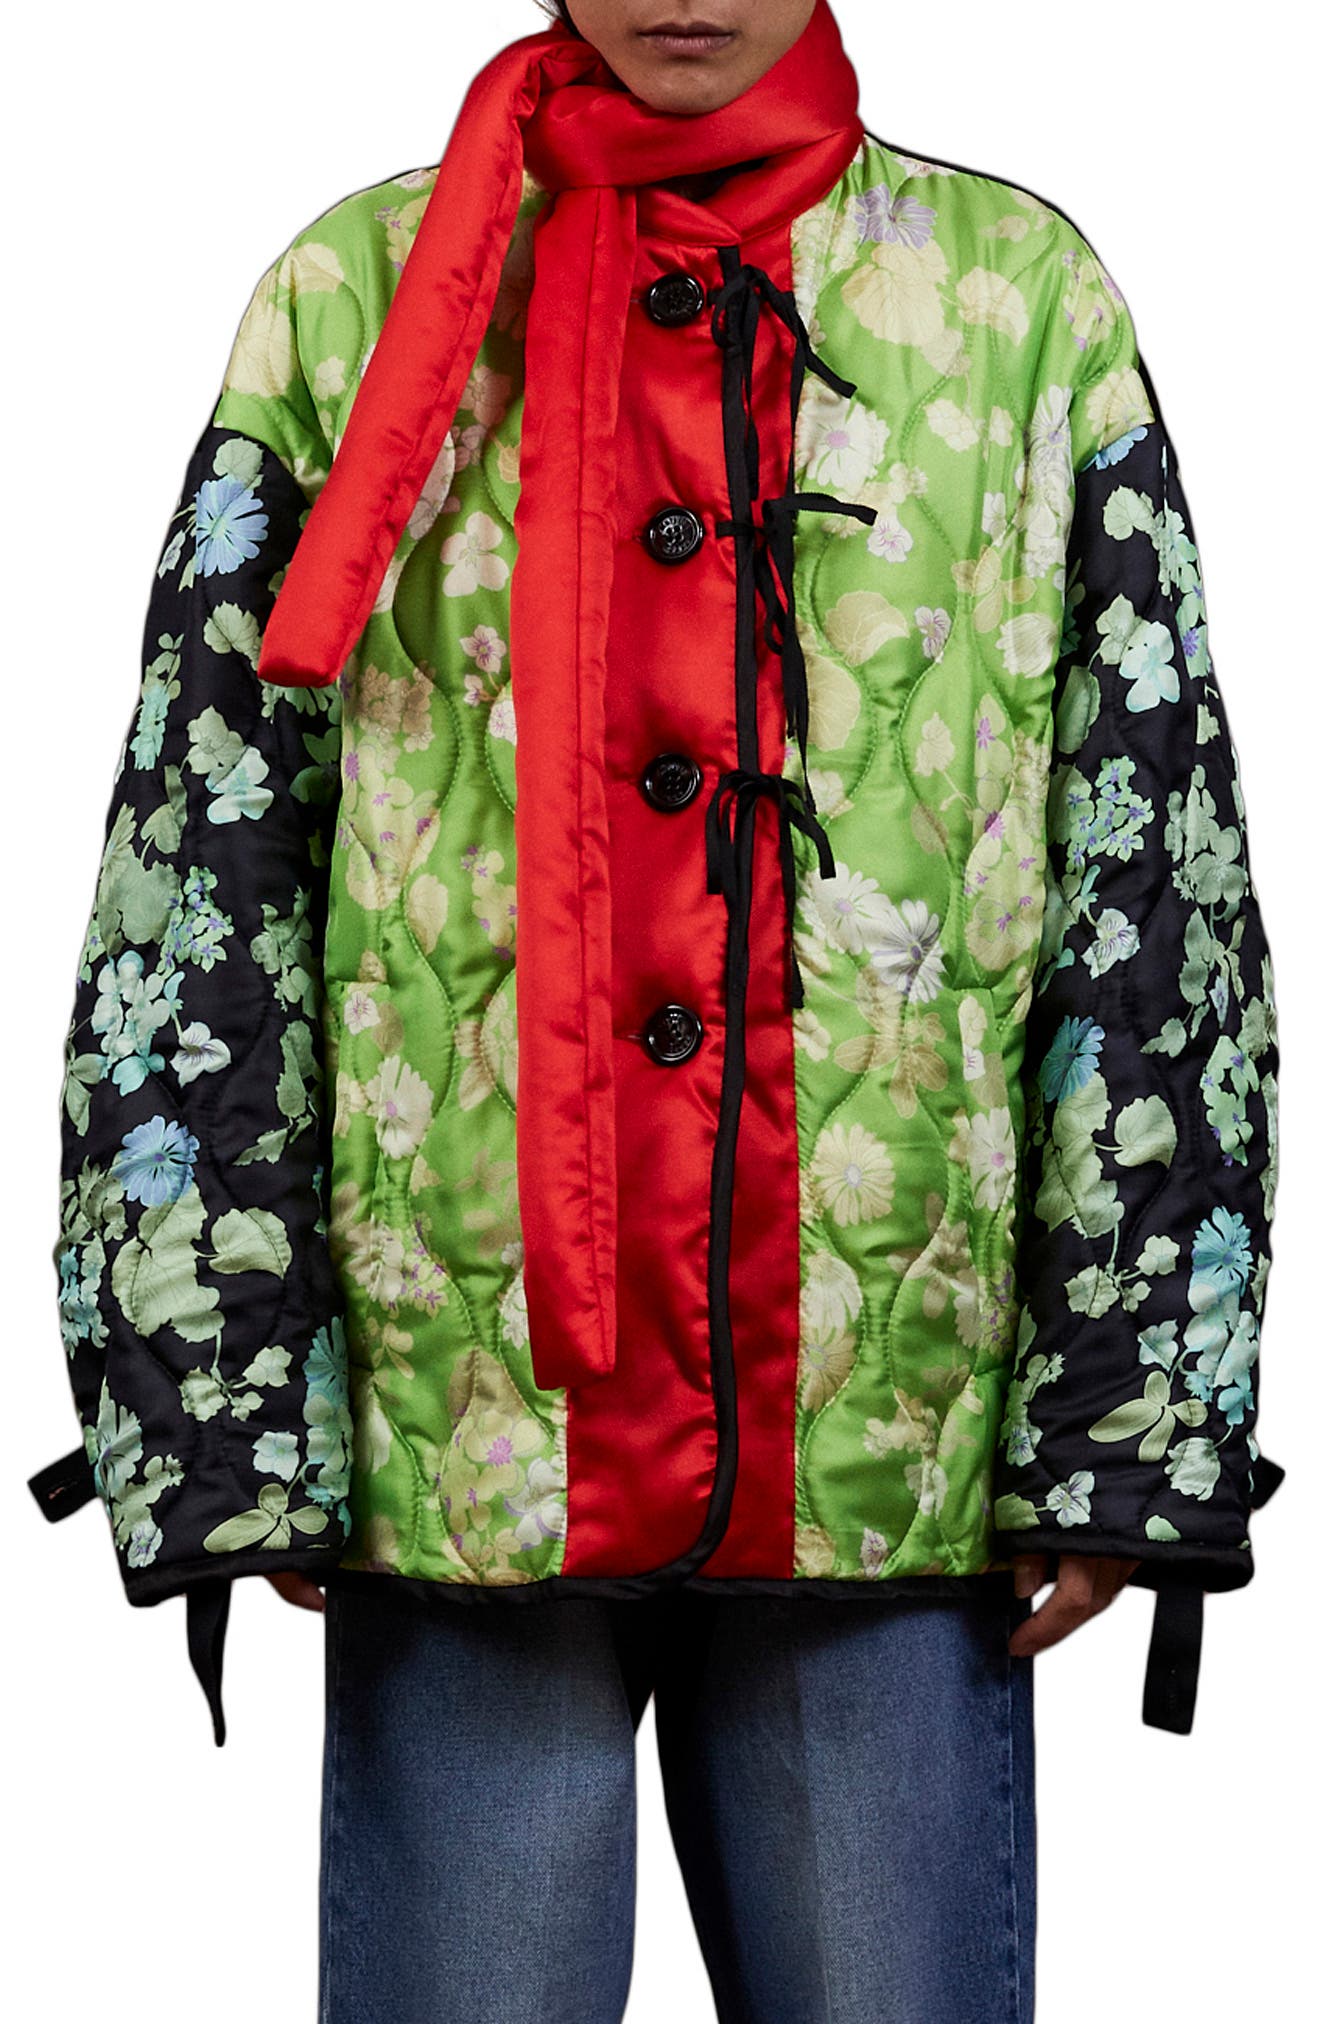 Meryll Rogge Colorblock Floral Quilted Silk Jacket in Apple Green